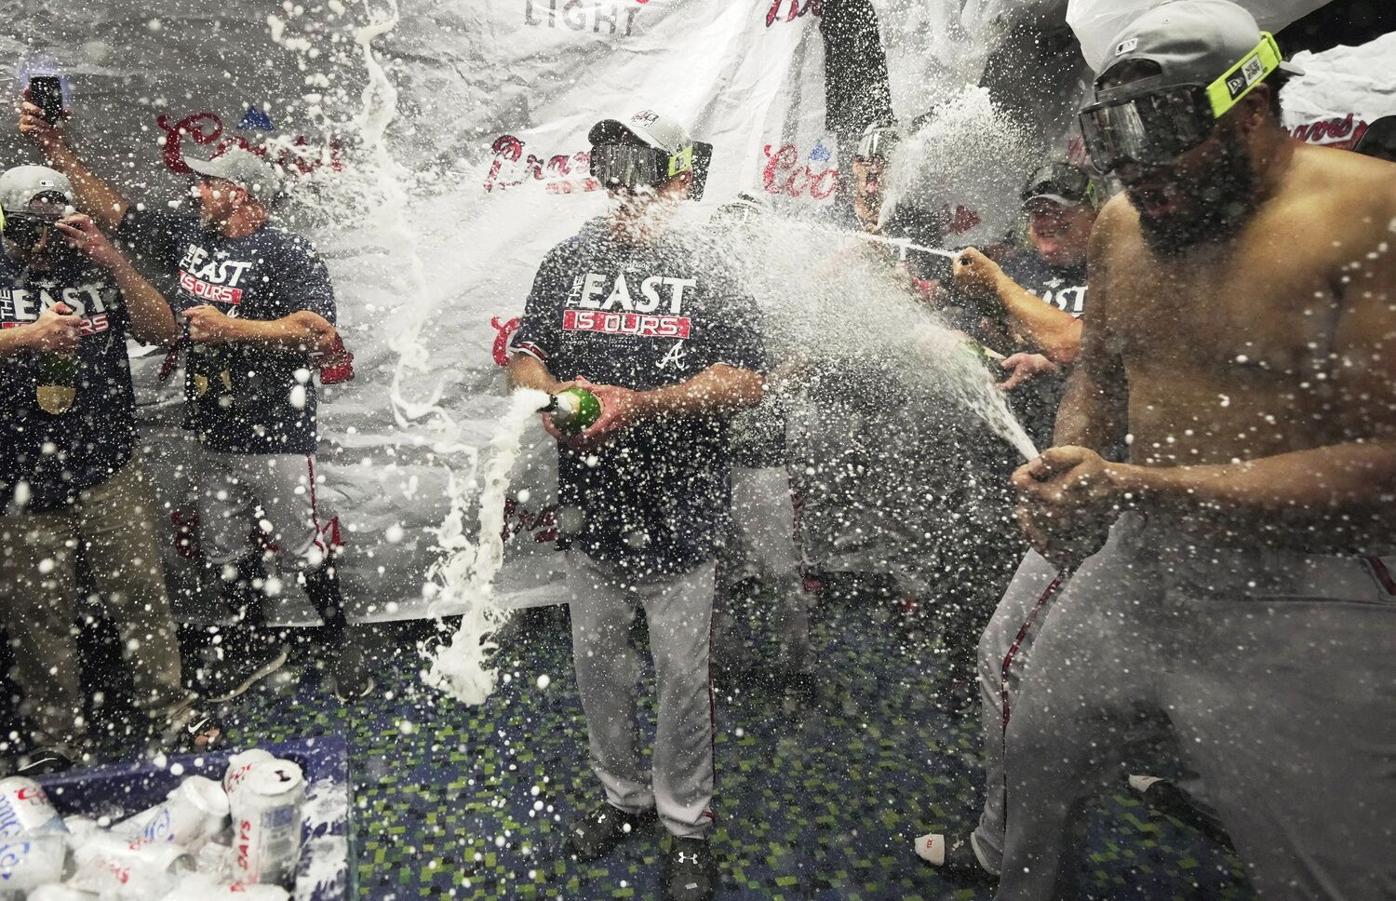 Braves beat Marlins 2-1, clinch 5th straight NL East title - The San Diego  Union-Tribune